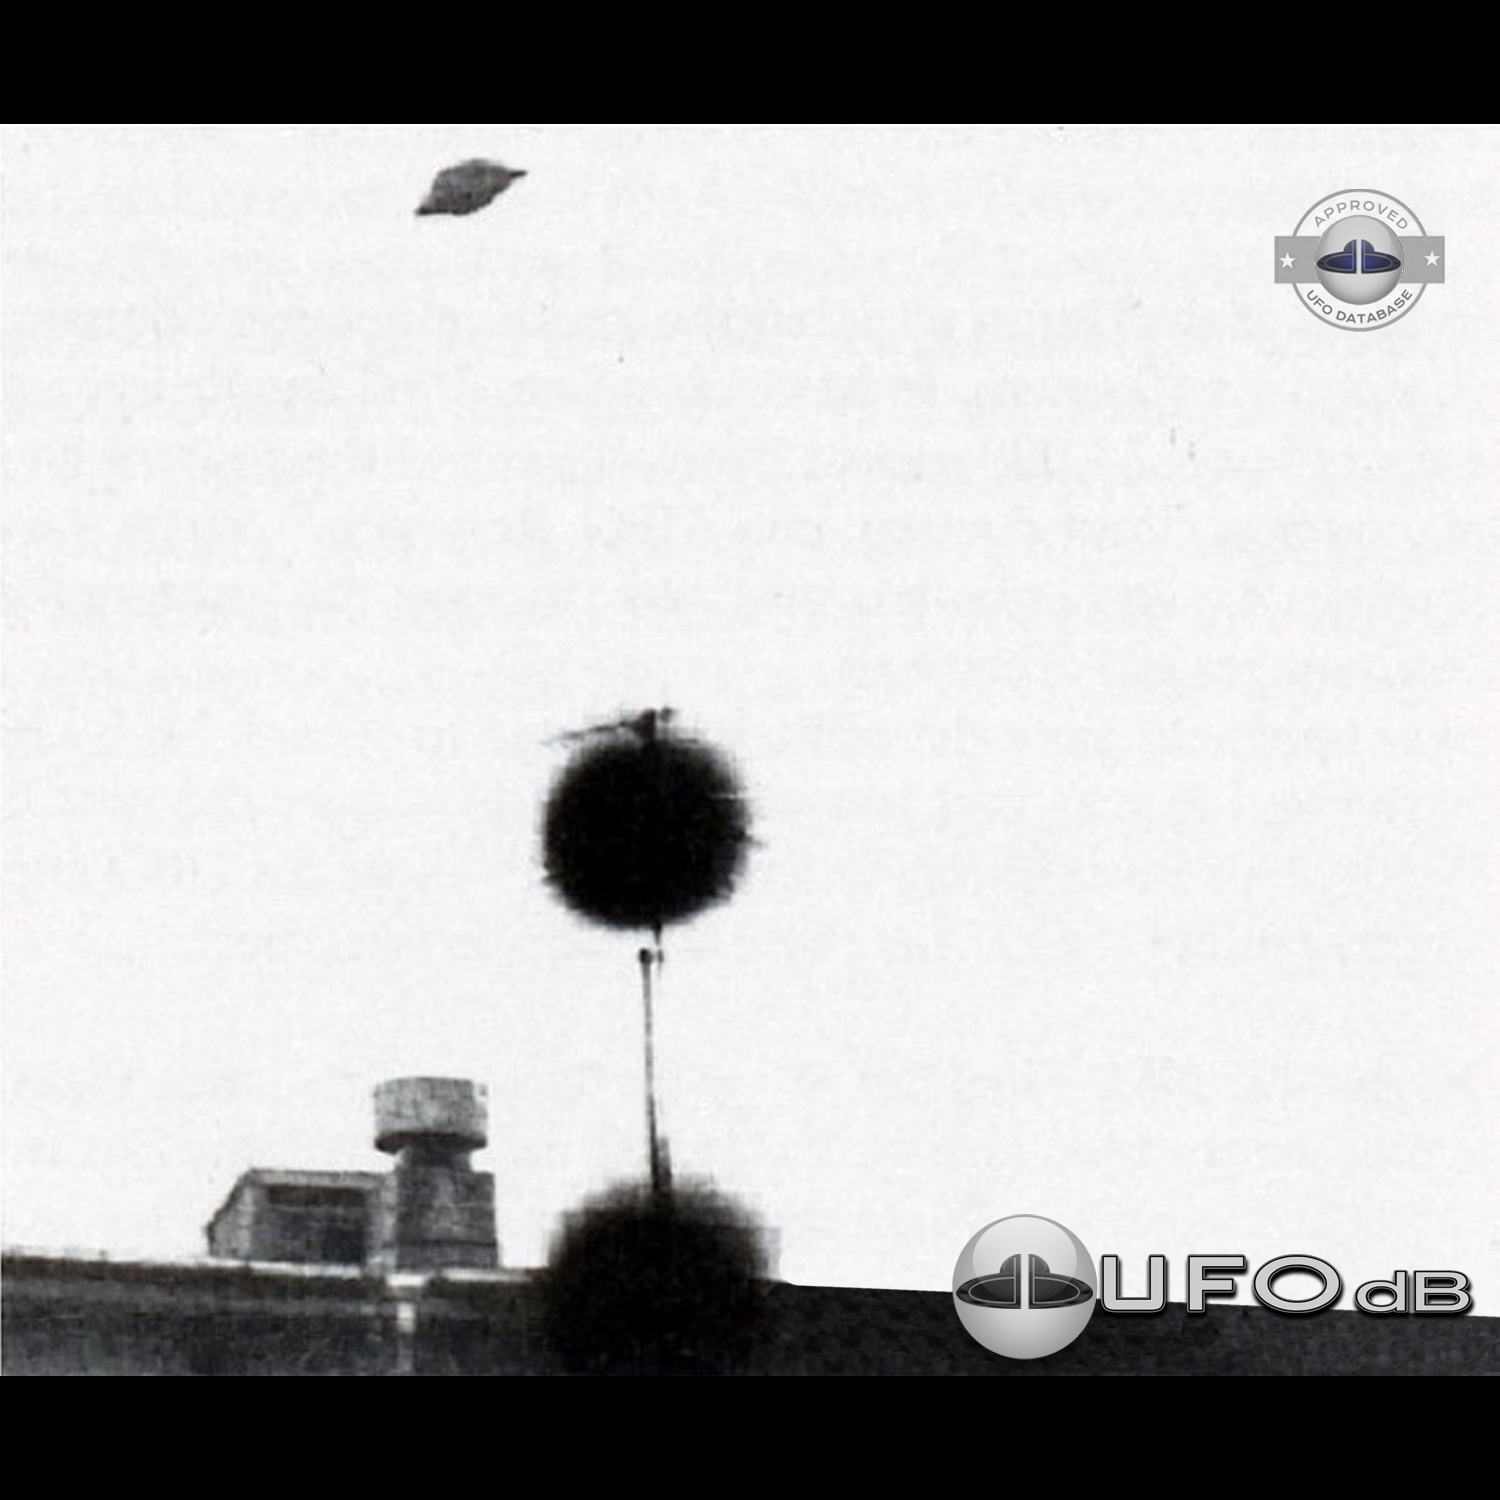 UFO sighting occurred in a small town Vidnoye in the Moscow Oblast UFO Picture #159-1